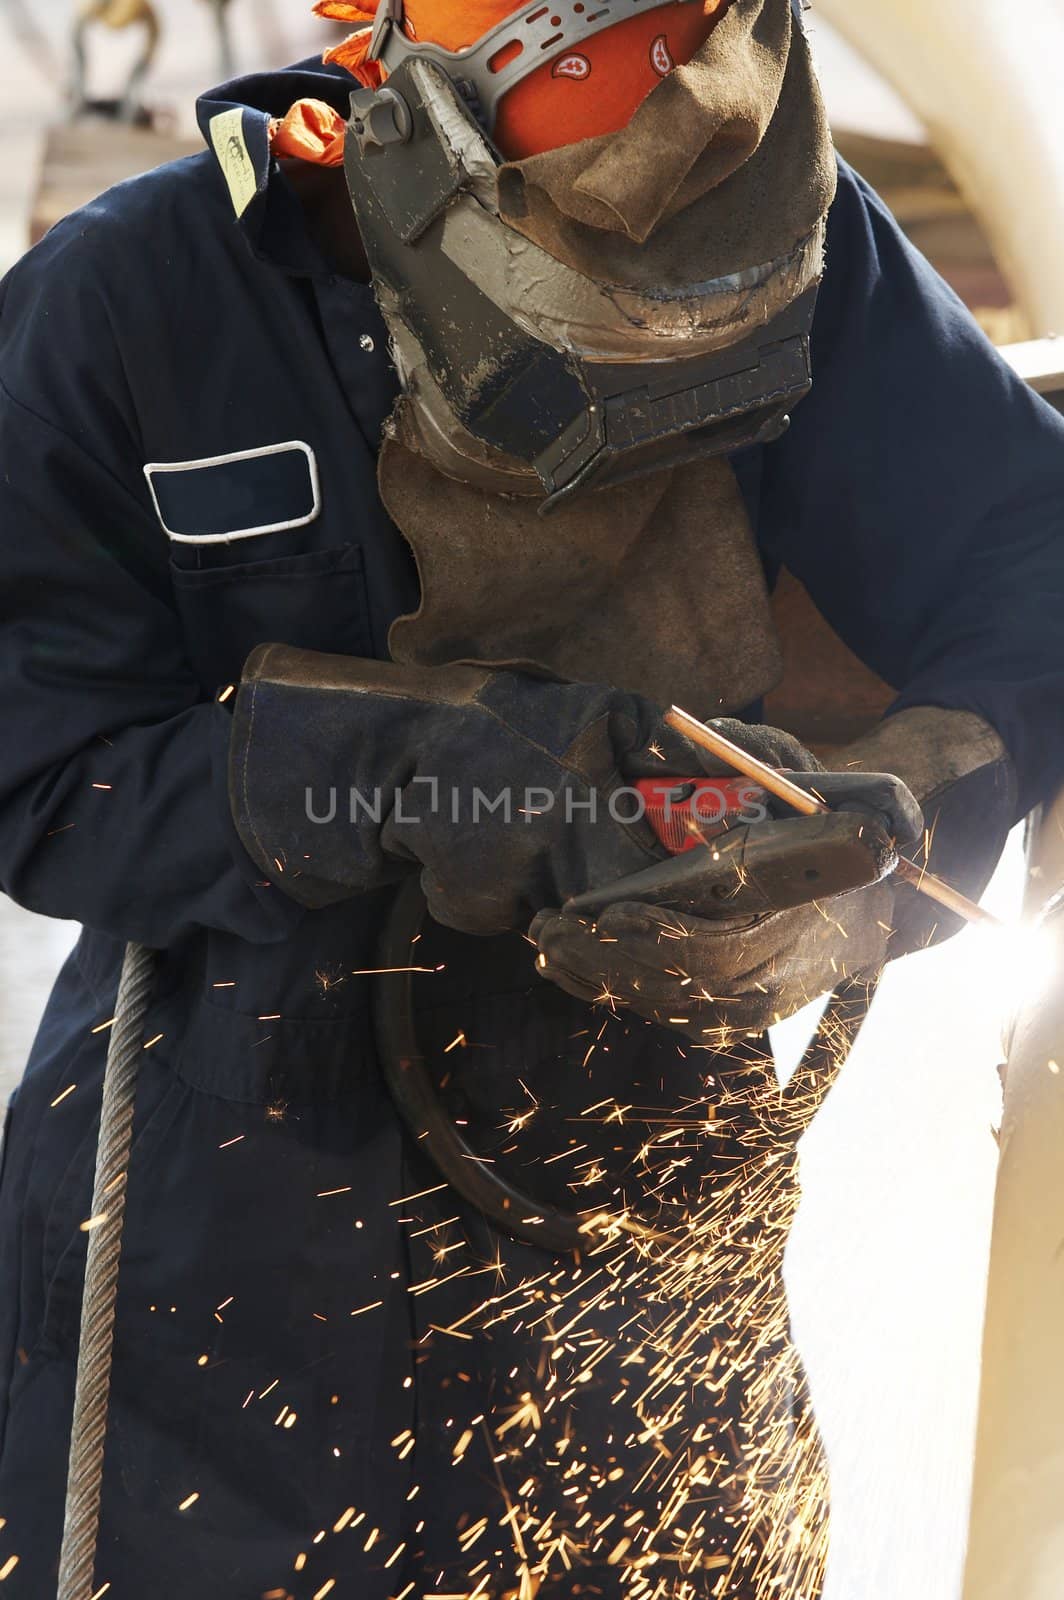 a picture of an arc welder at work